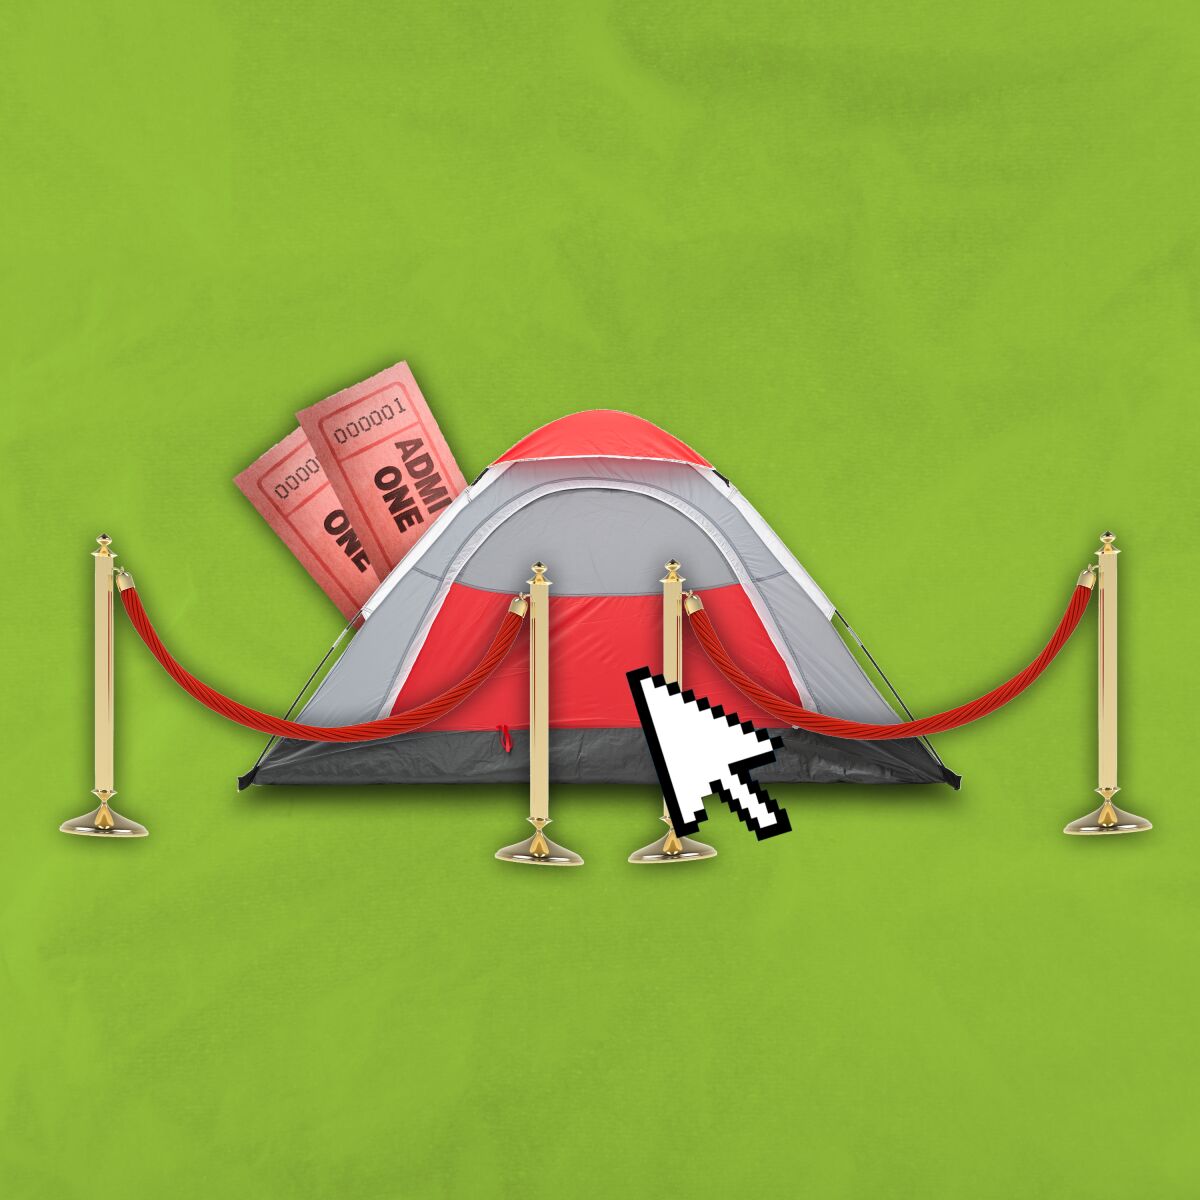 Illustration of a camping tent behind red velvet ropes.